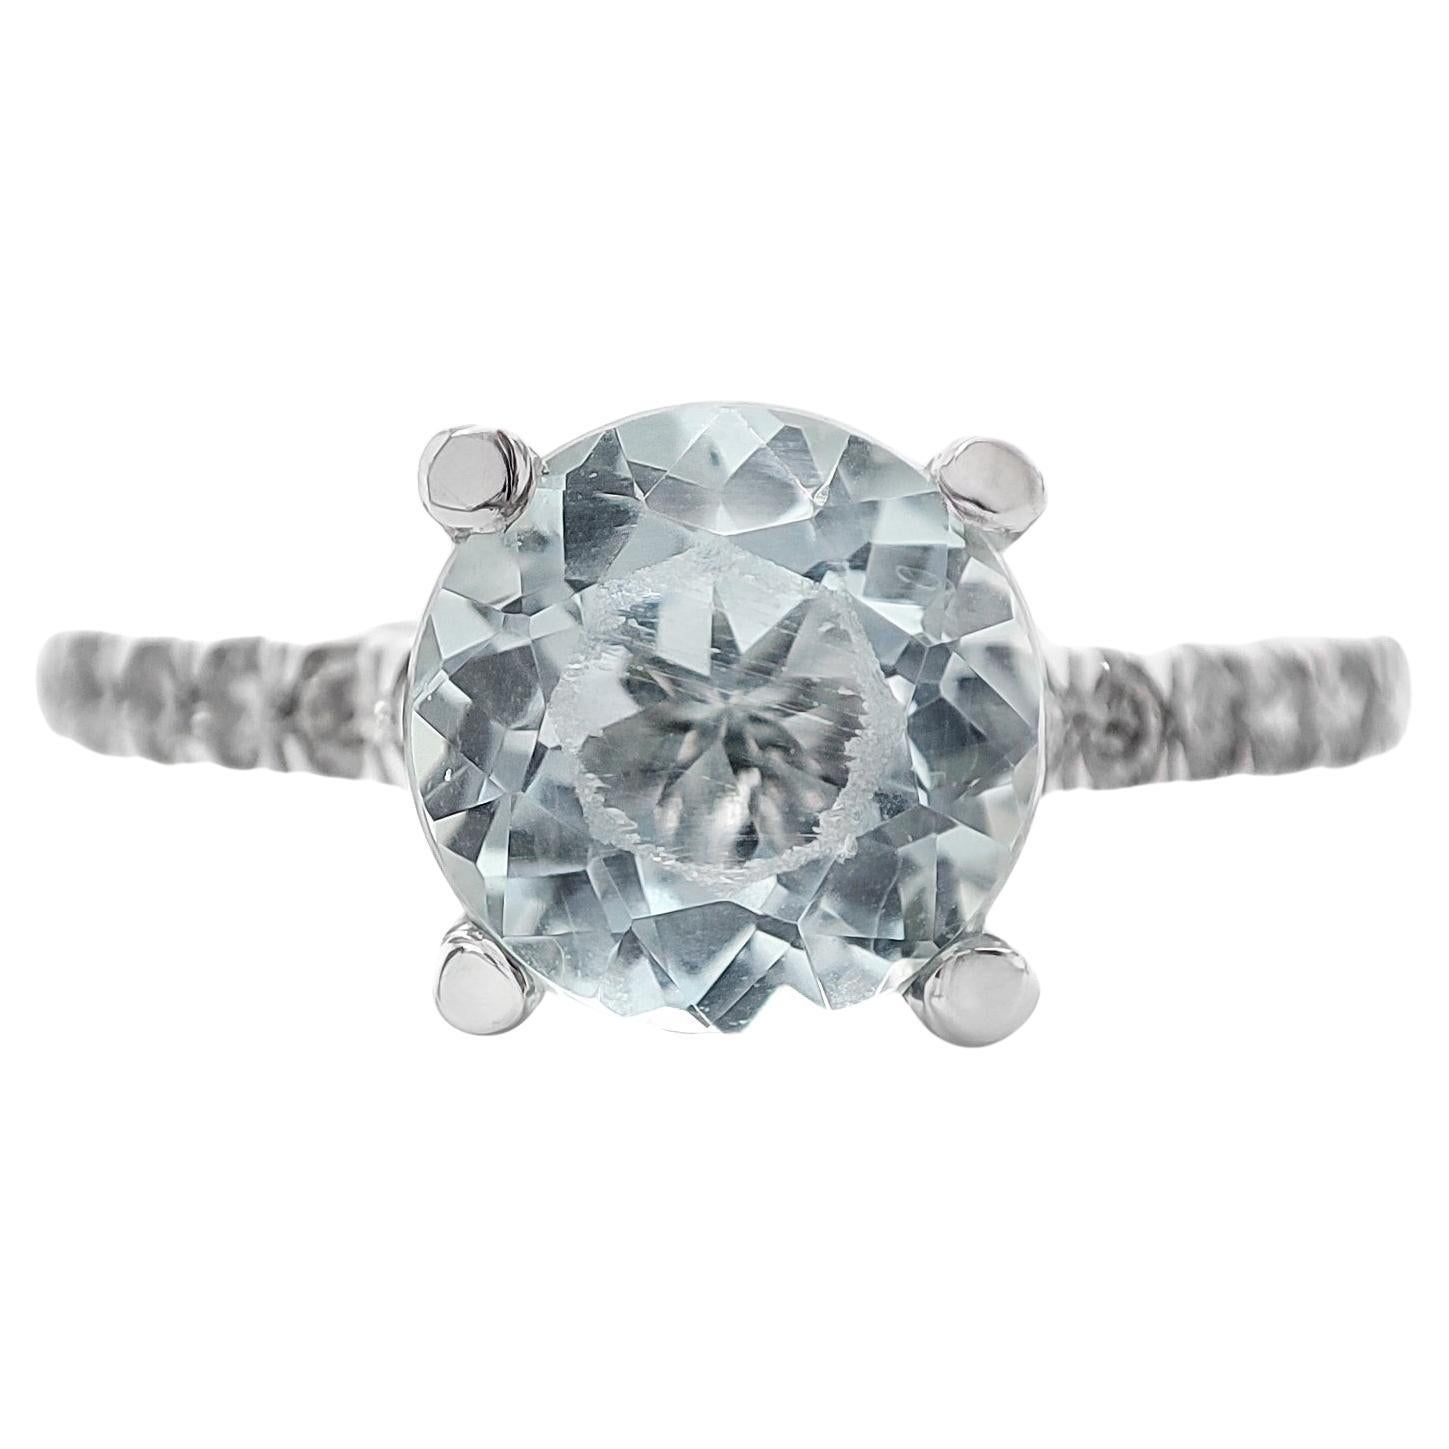 FOR US BUYER NO VAT

This exquisite piece features a natural blue aquamarine with a total weight of 1.25 carats, taking center stage with its serene and captivating blue hue.

Complementing the aquamarine are 12 diamonds, totaling 0.23 carats. These